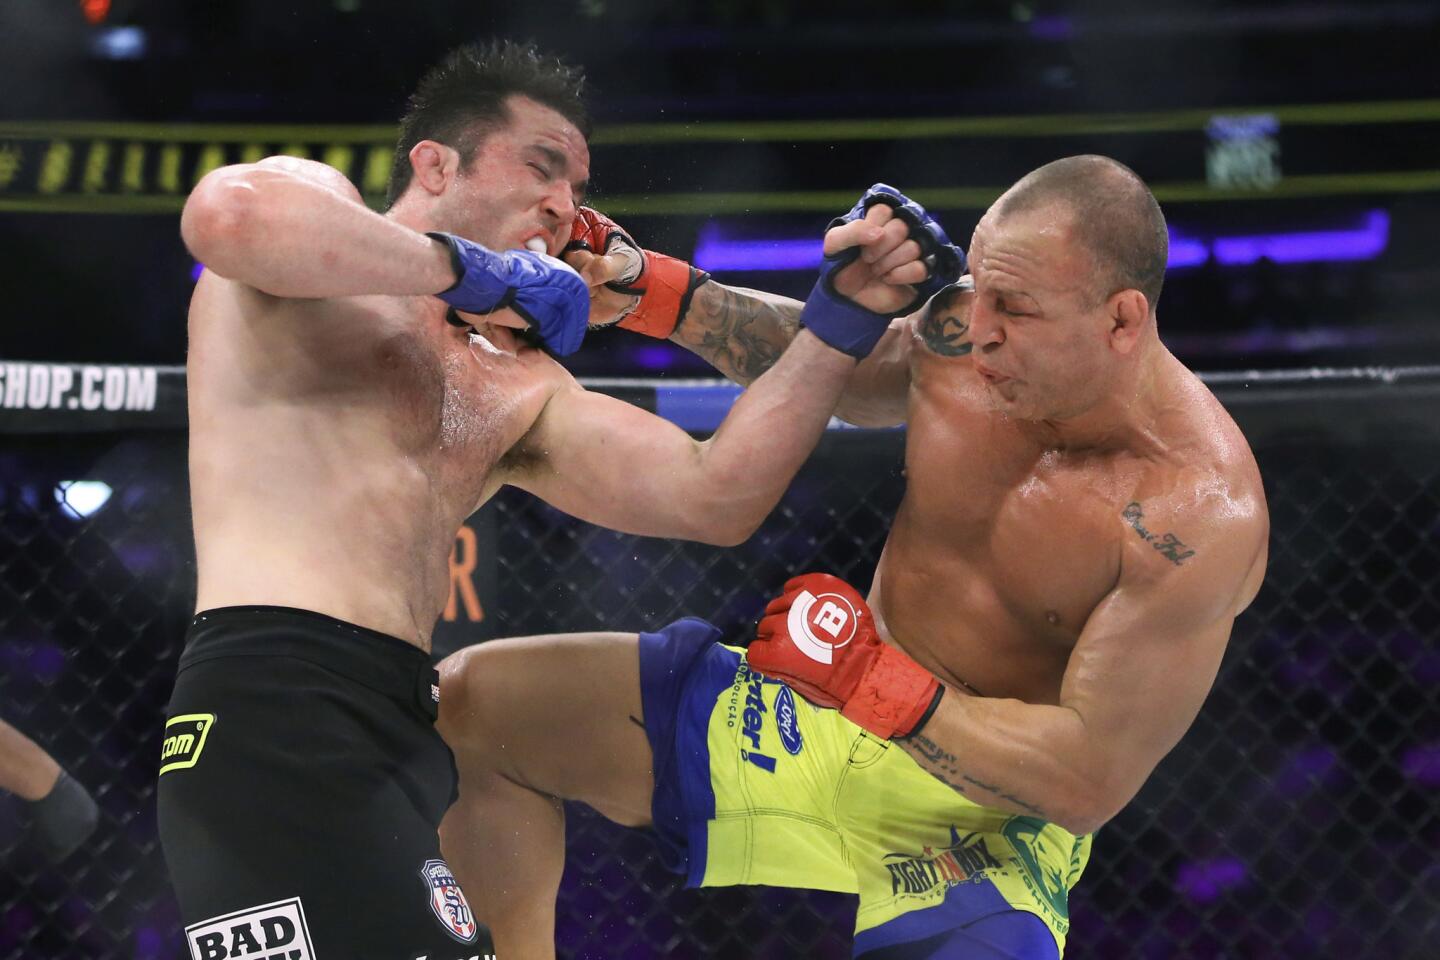 Chael Sonnen, left, trades blows with Wanderlei Silva during their bout at Bellator NYC.